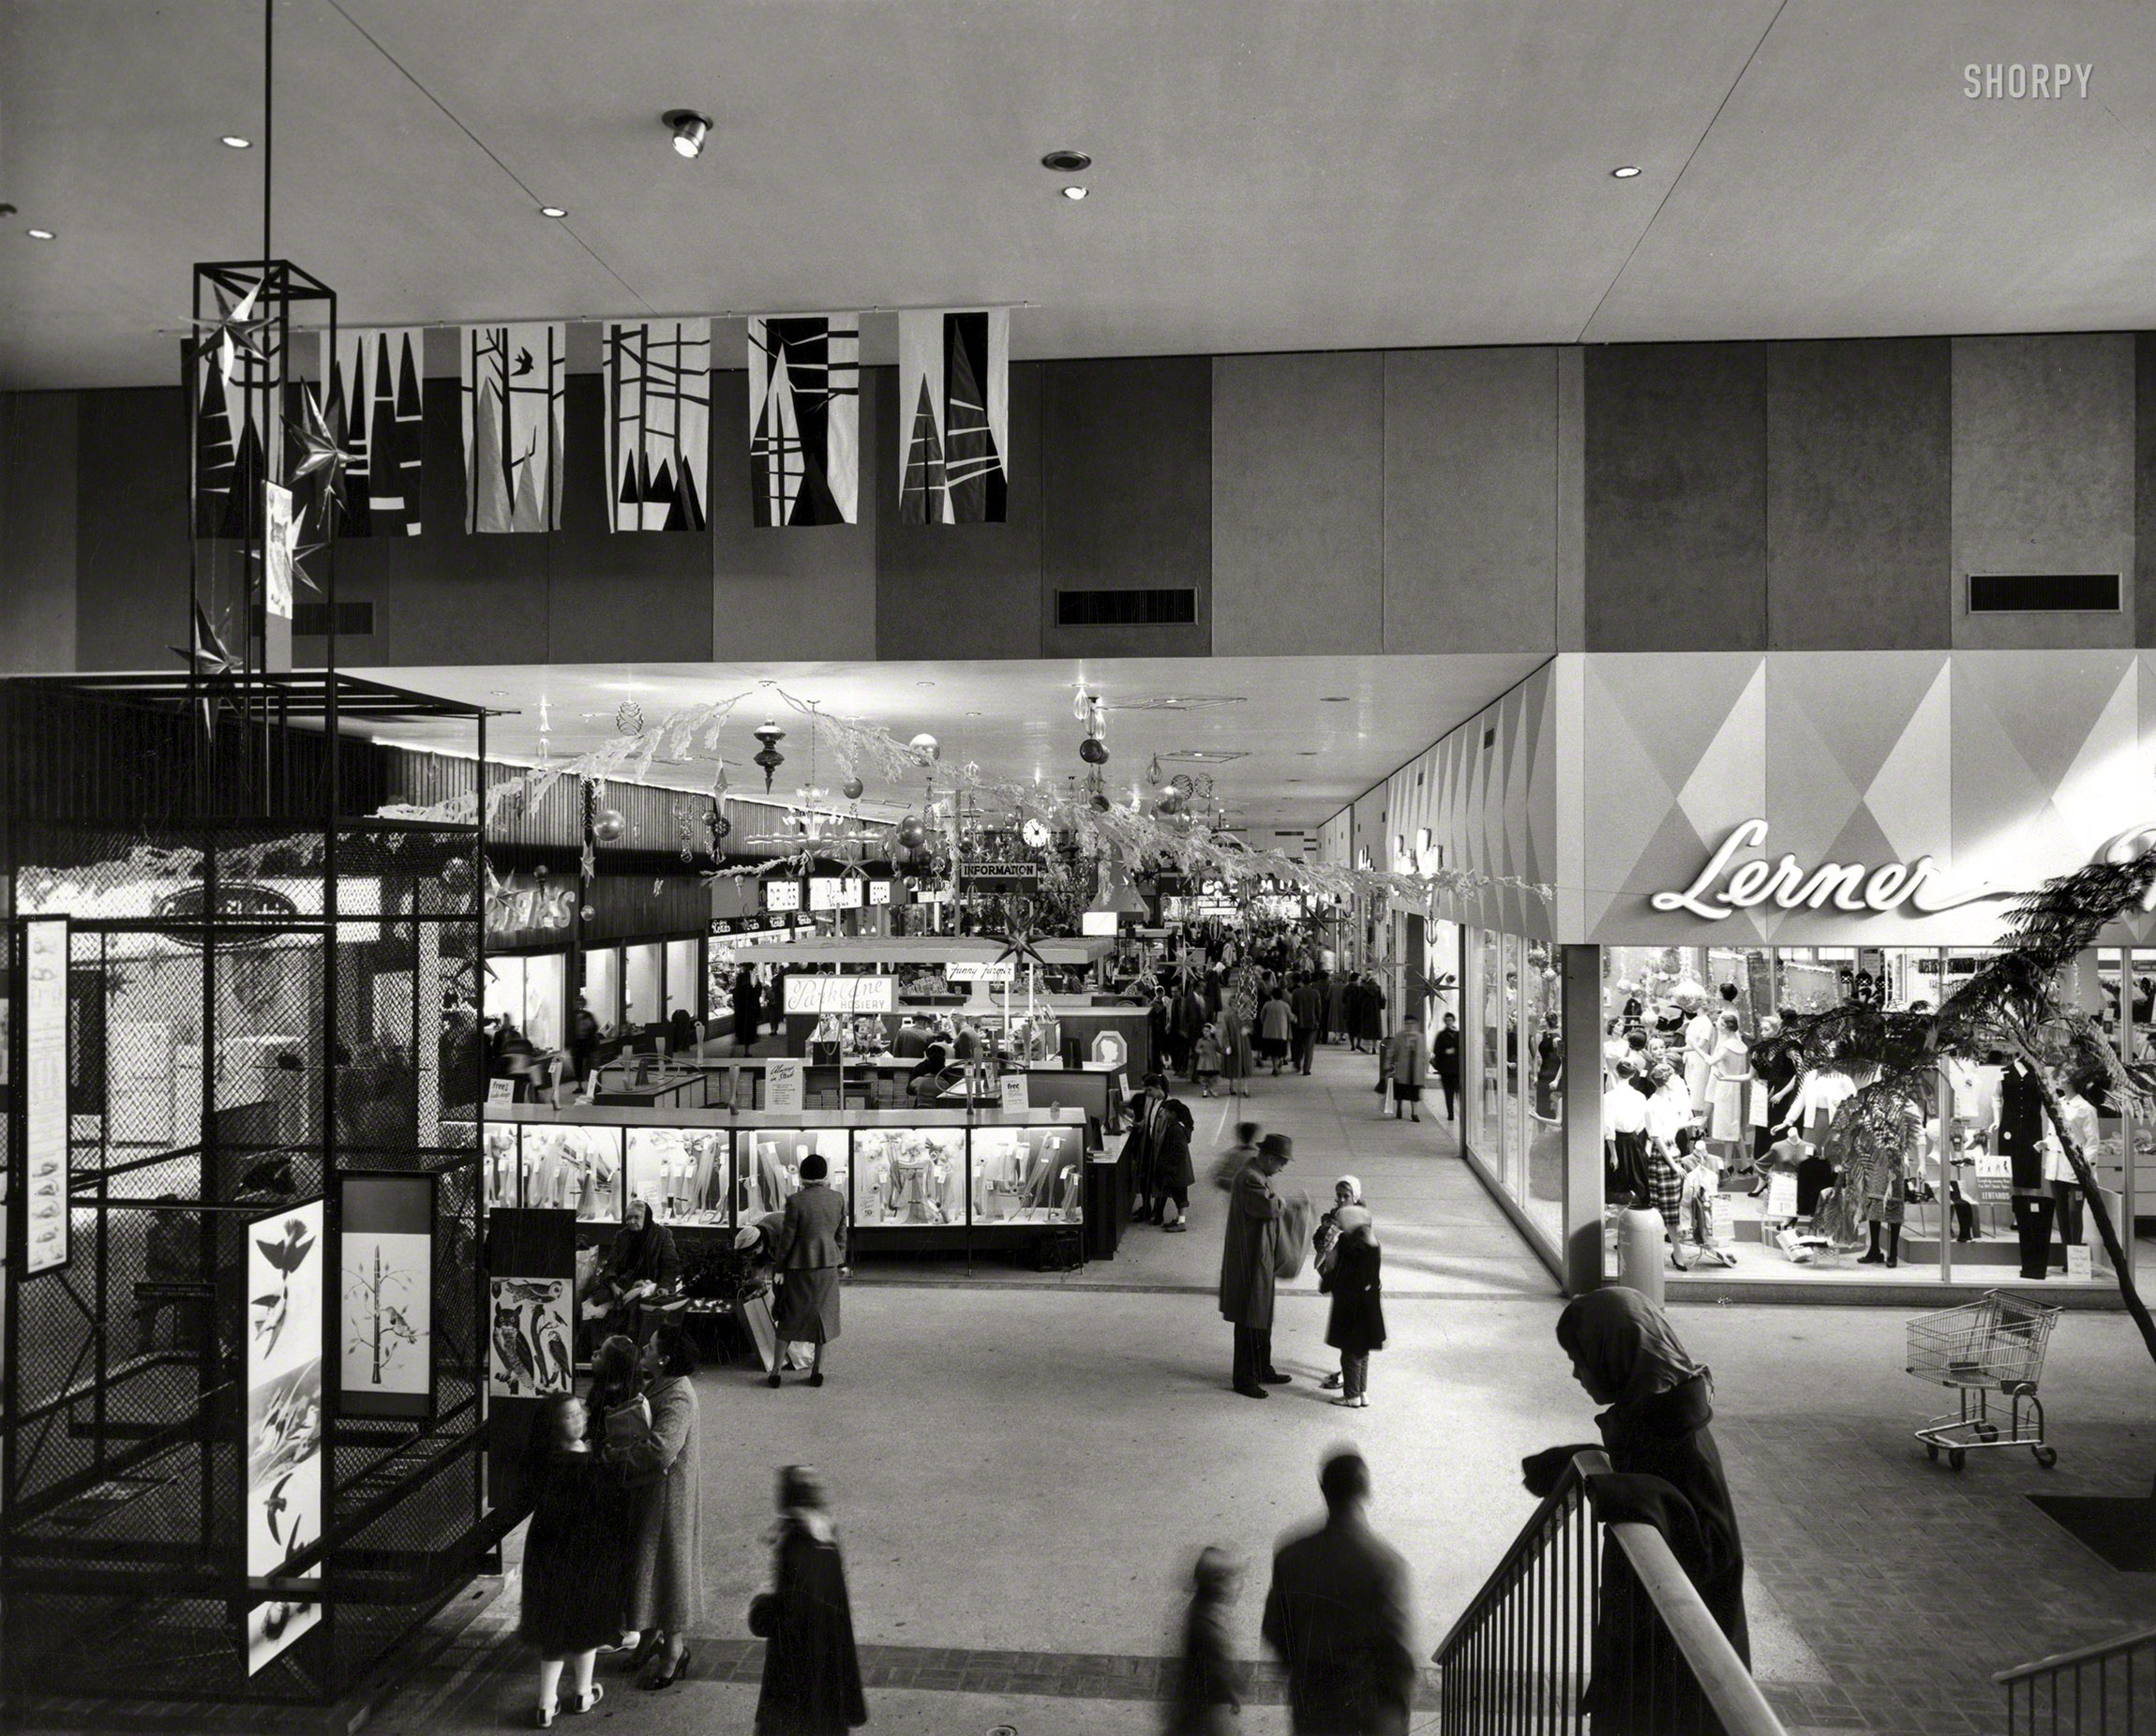 1958. "Harundale Mall, Glen Burnie, Maryland. Interior view." The first enclosed shopping center on the East Coast. Nirenstein Collection print. View full size.